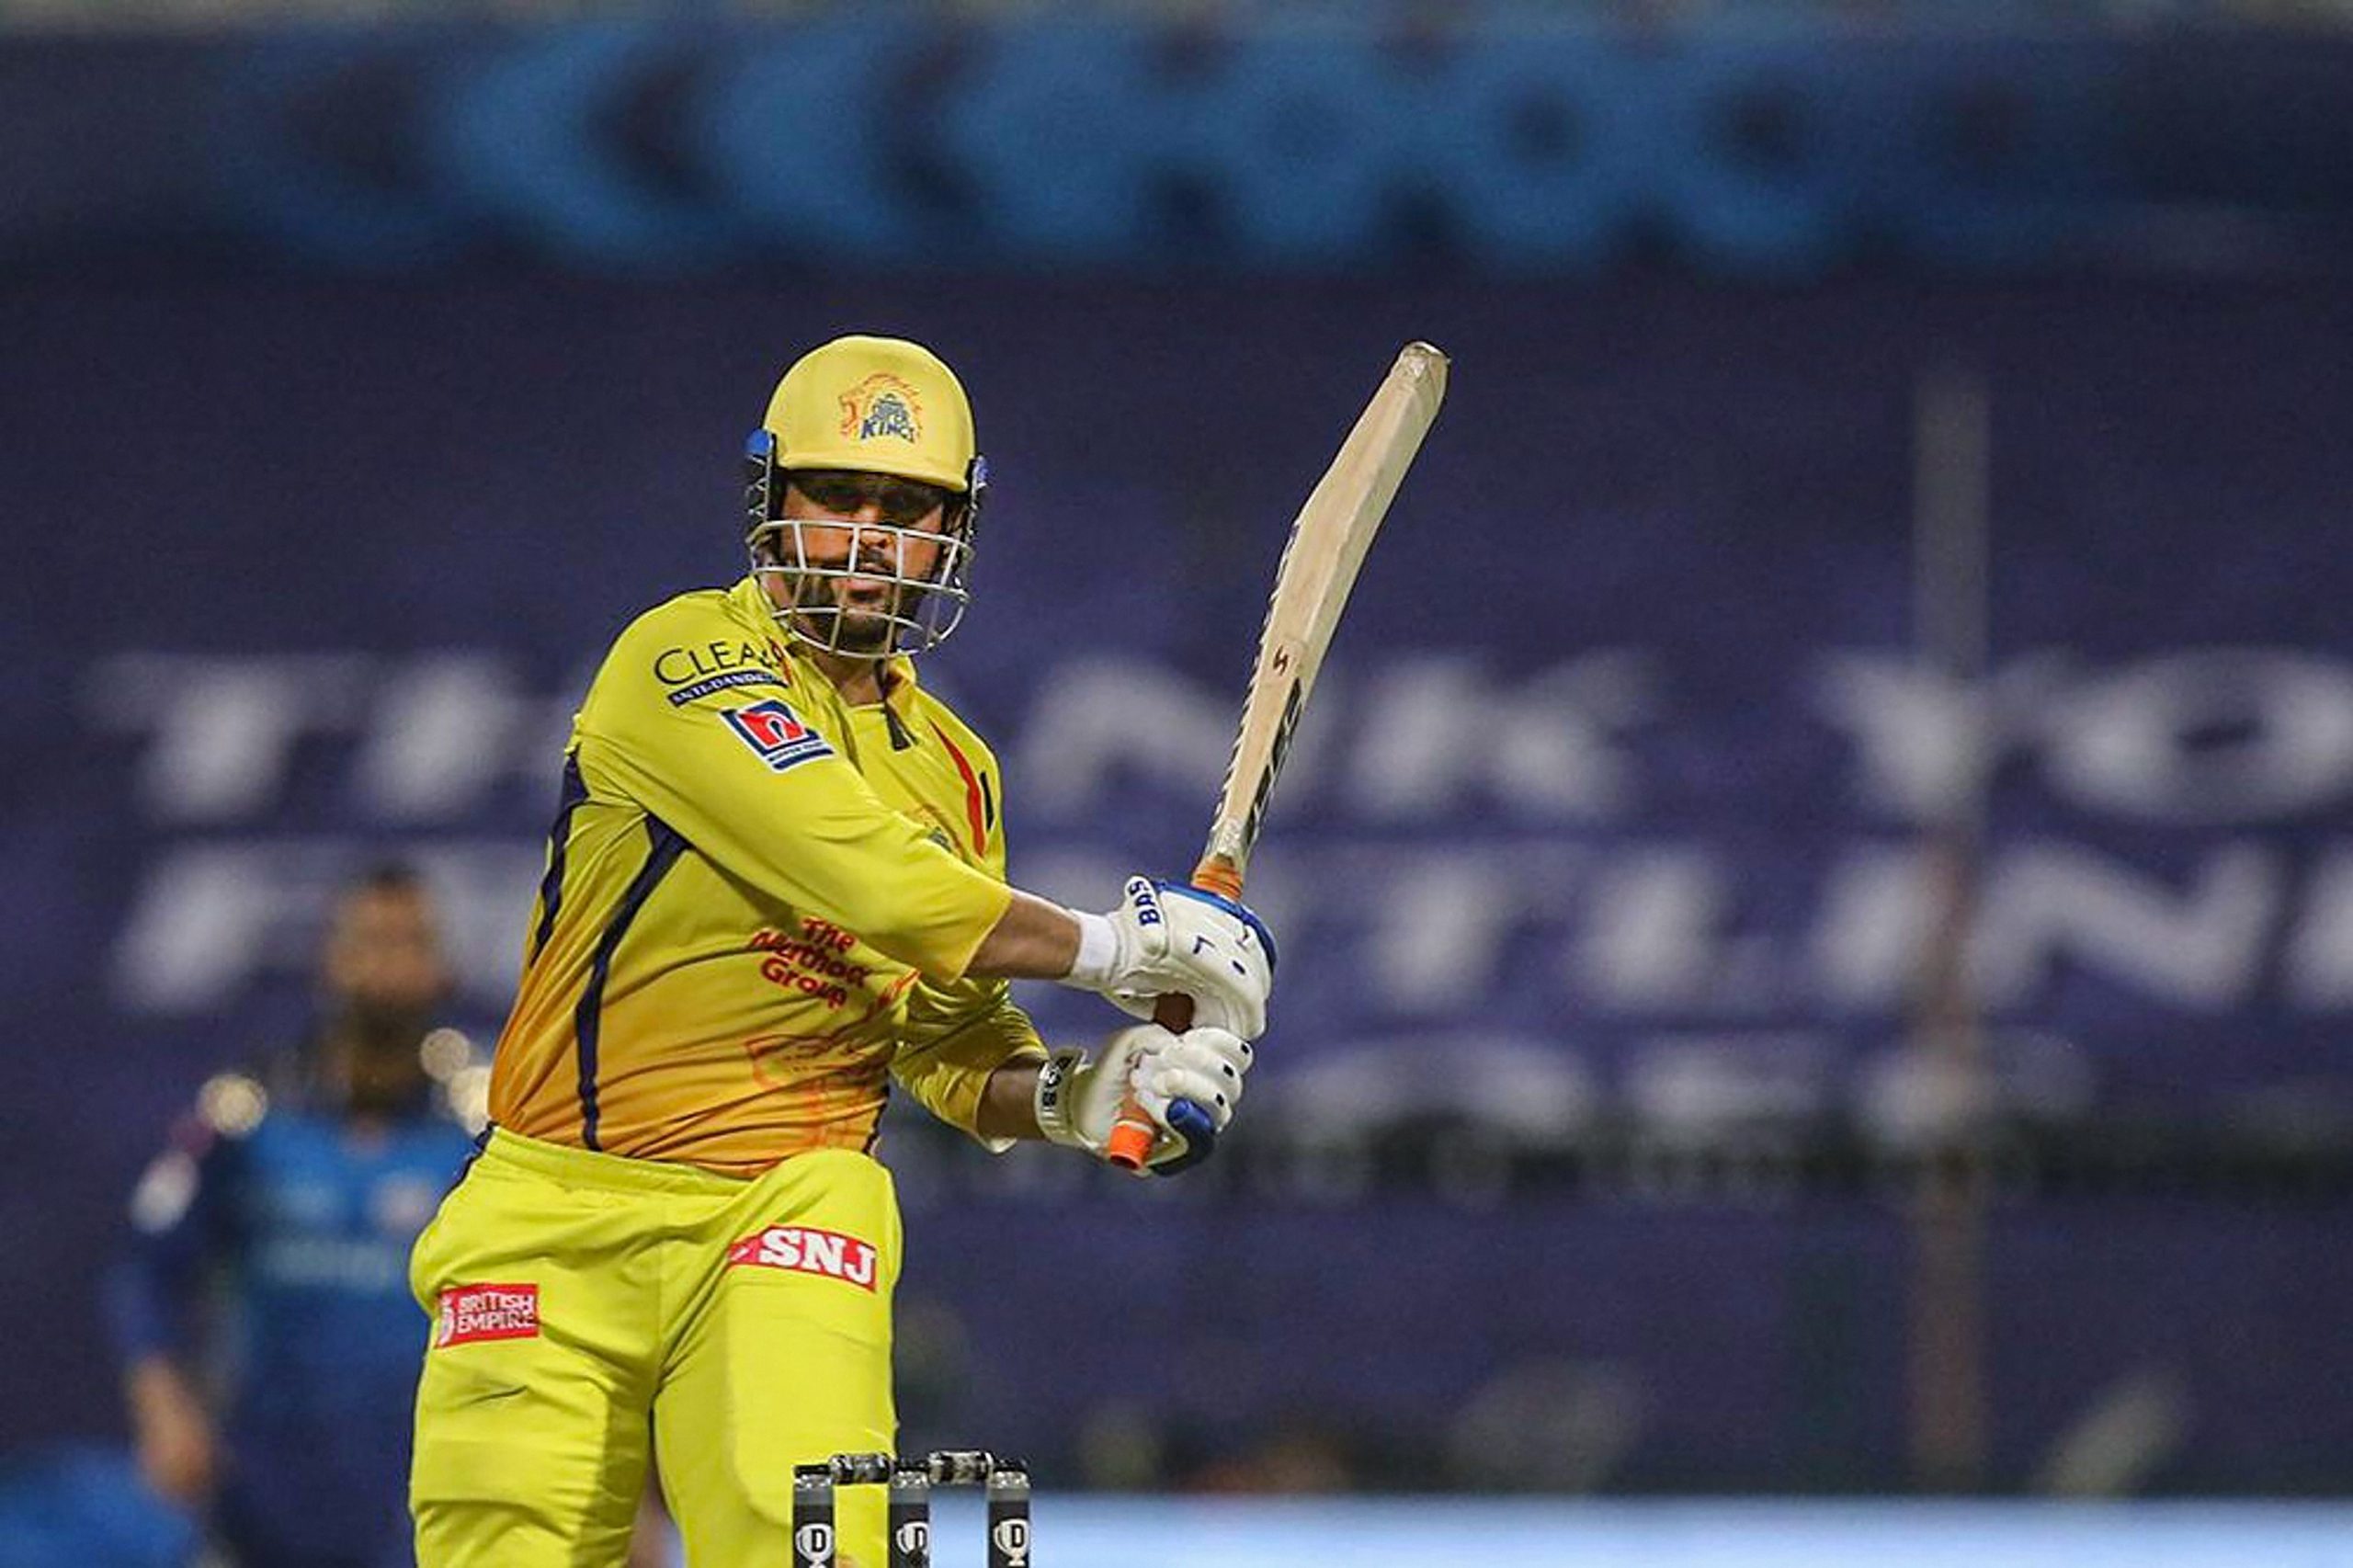 Fan turns lucky, pockets the ball that MS Dhoni hit out of the stadium against Rajasthan Royals